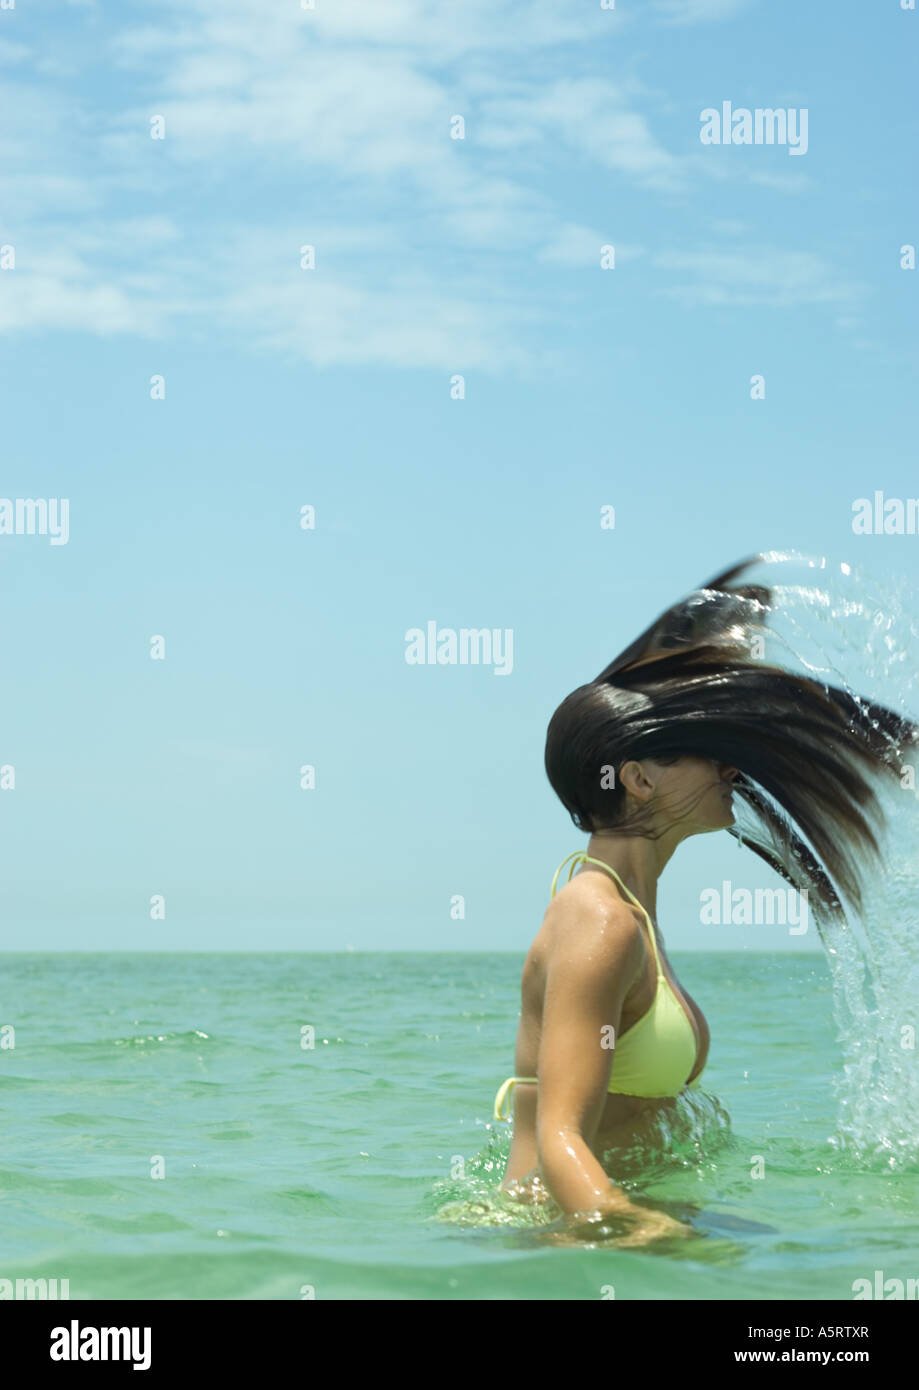 Woman standing in sea, flipping wet hair Stock Photo